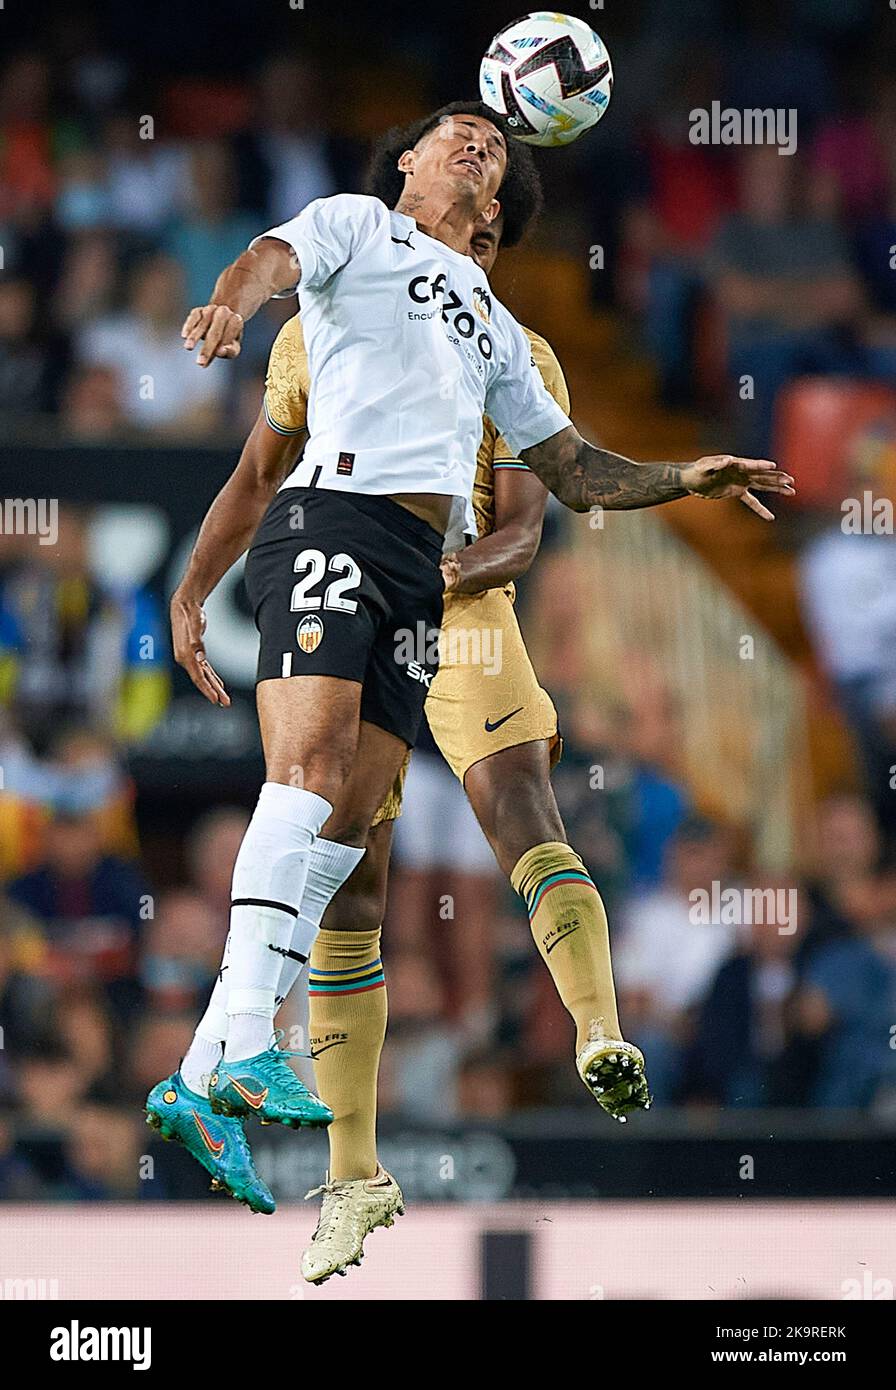 (221030) -- VALENCIA, Oct. 30, 2022 (Xinhua) -- Jules Kounde (back) of FC Barcelona vies with Marcos Andre of Valencia FC during their La Liga football match in Valencia, Spain, Oct. 29, 2022. (Str/Xinhua) Credit: Xinhua/Alamy Live News Stock Photo